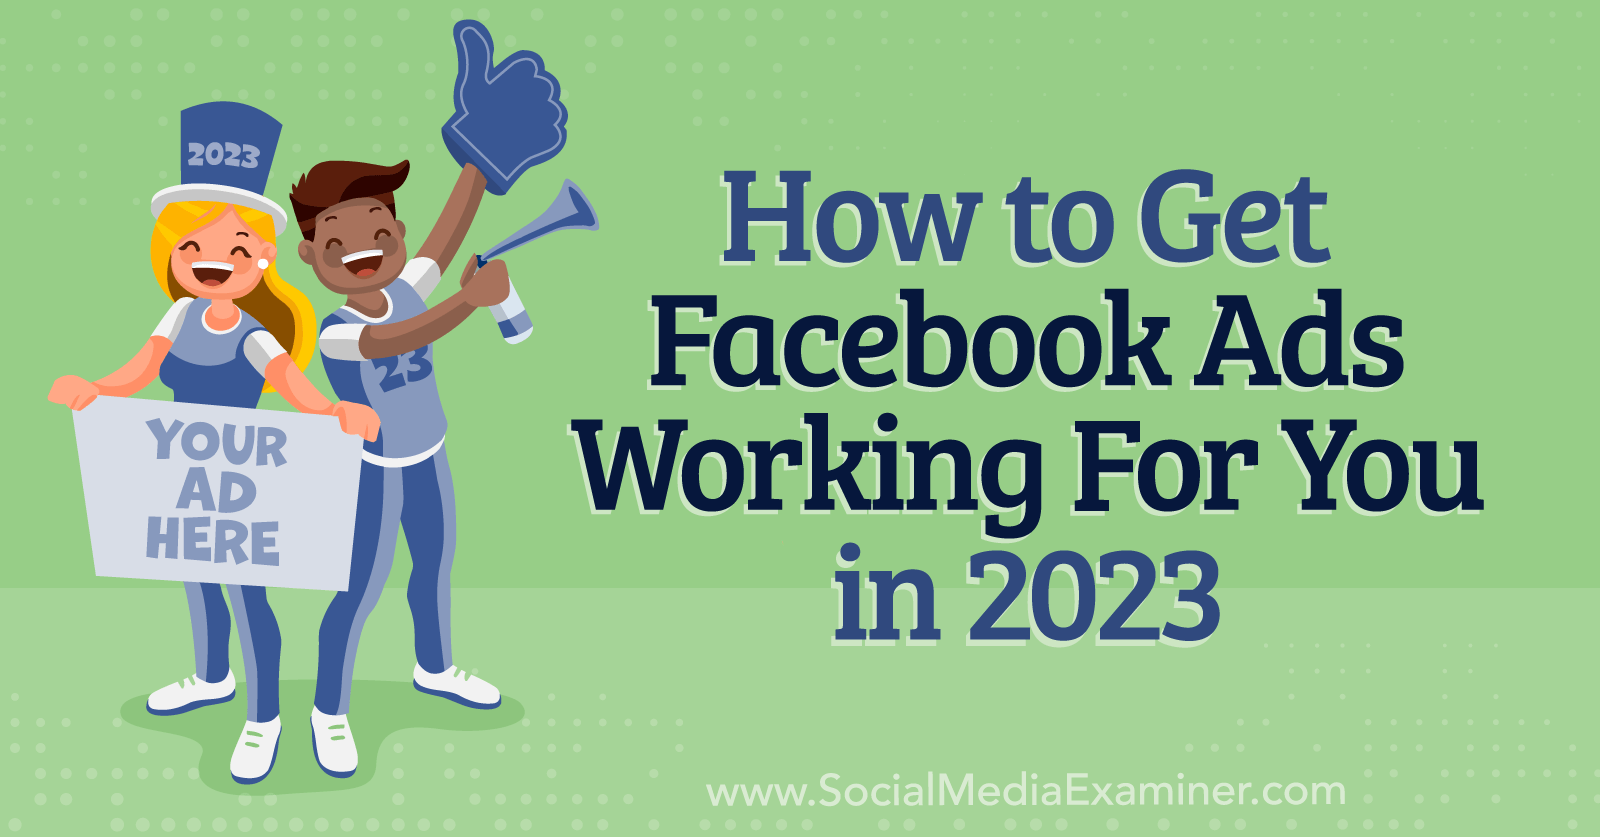 How to Get Facebook Ads Working for You in 2023-Social Media Examiner